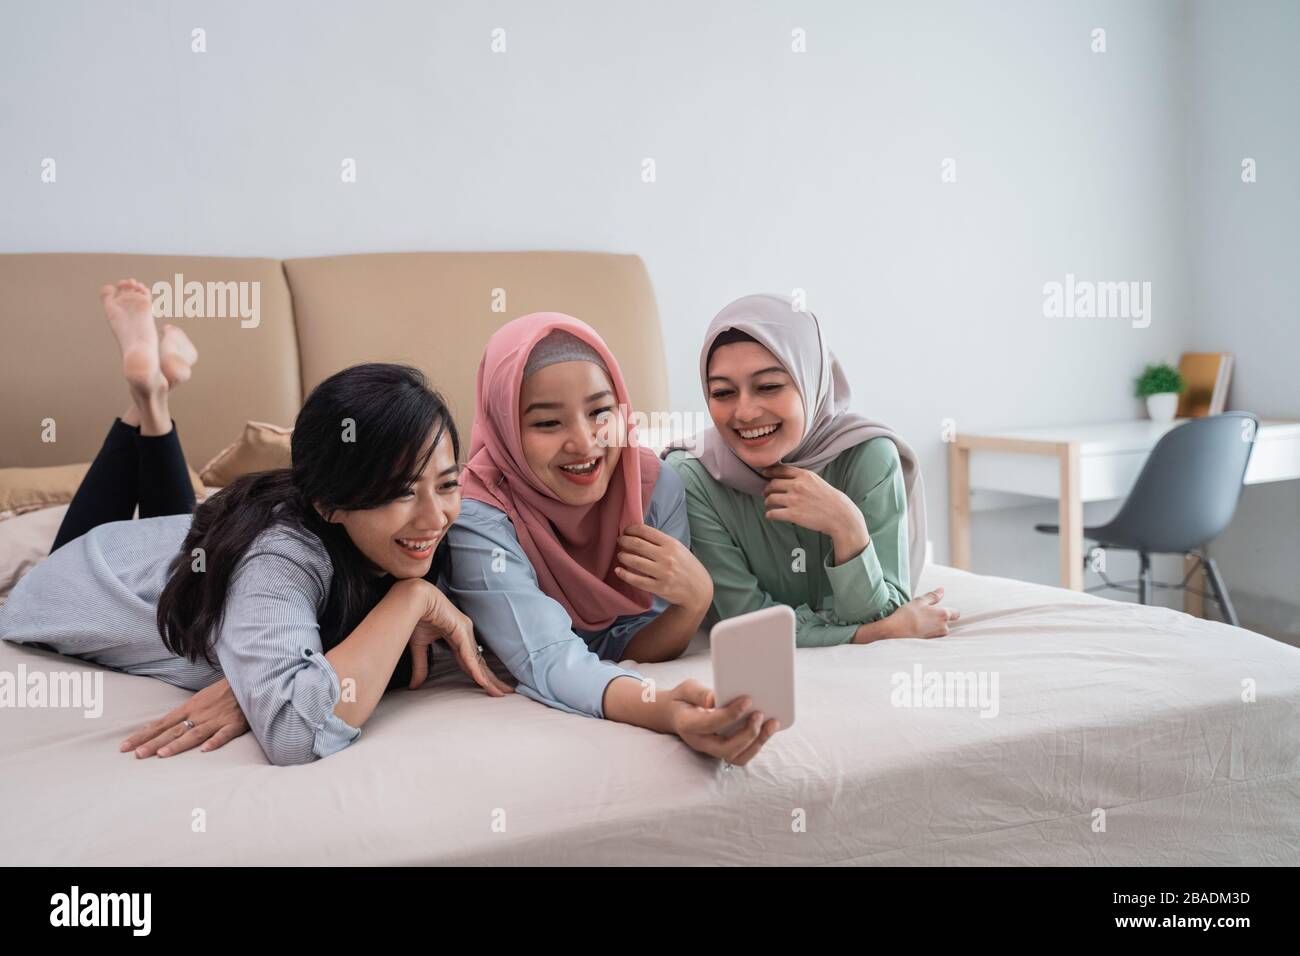 three Asian women lying in bed while doing video calls using a smartphone while enjoying a relaxing time Stock Photo